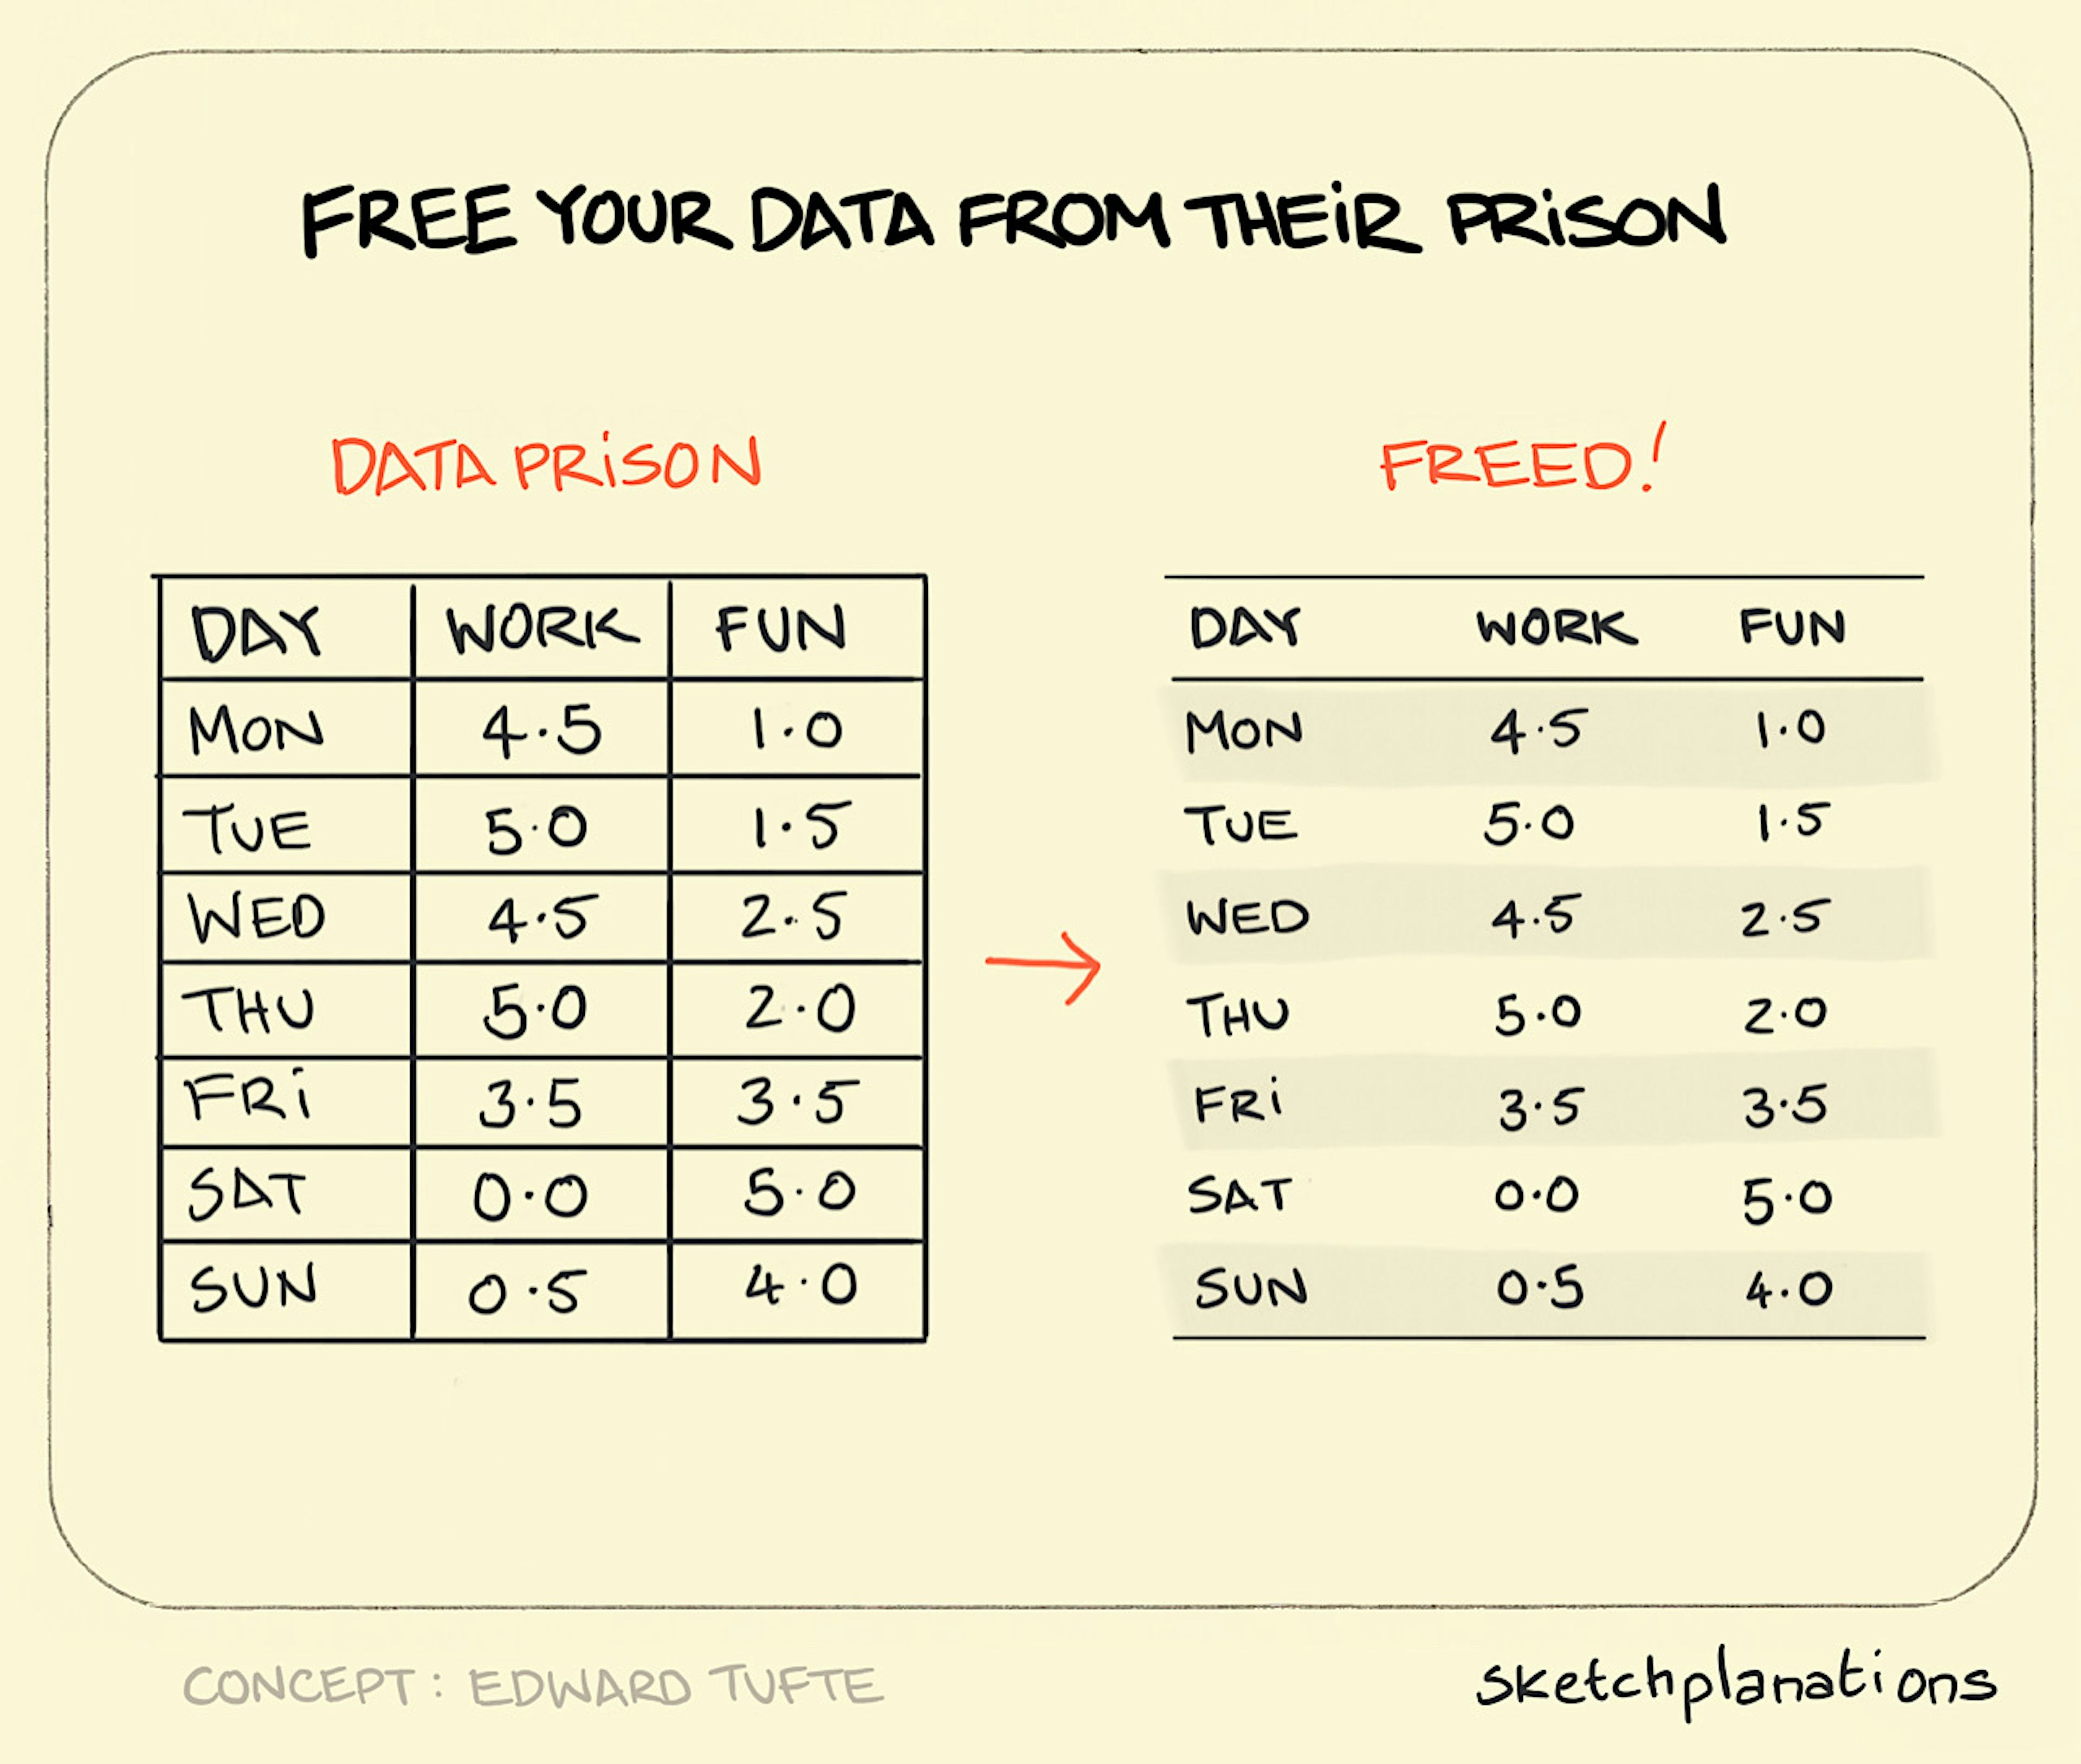 The Data Prison illustration: shows 2 tables with identical data describing a schedule of work and fun for every day of the week. The "imprisoned" data in the table on the left is separated by lines in a grid. The "freed" data in the table on the right has no lines, and instead uses shading and spacing.